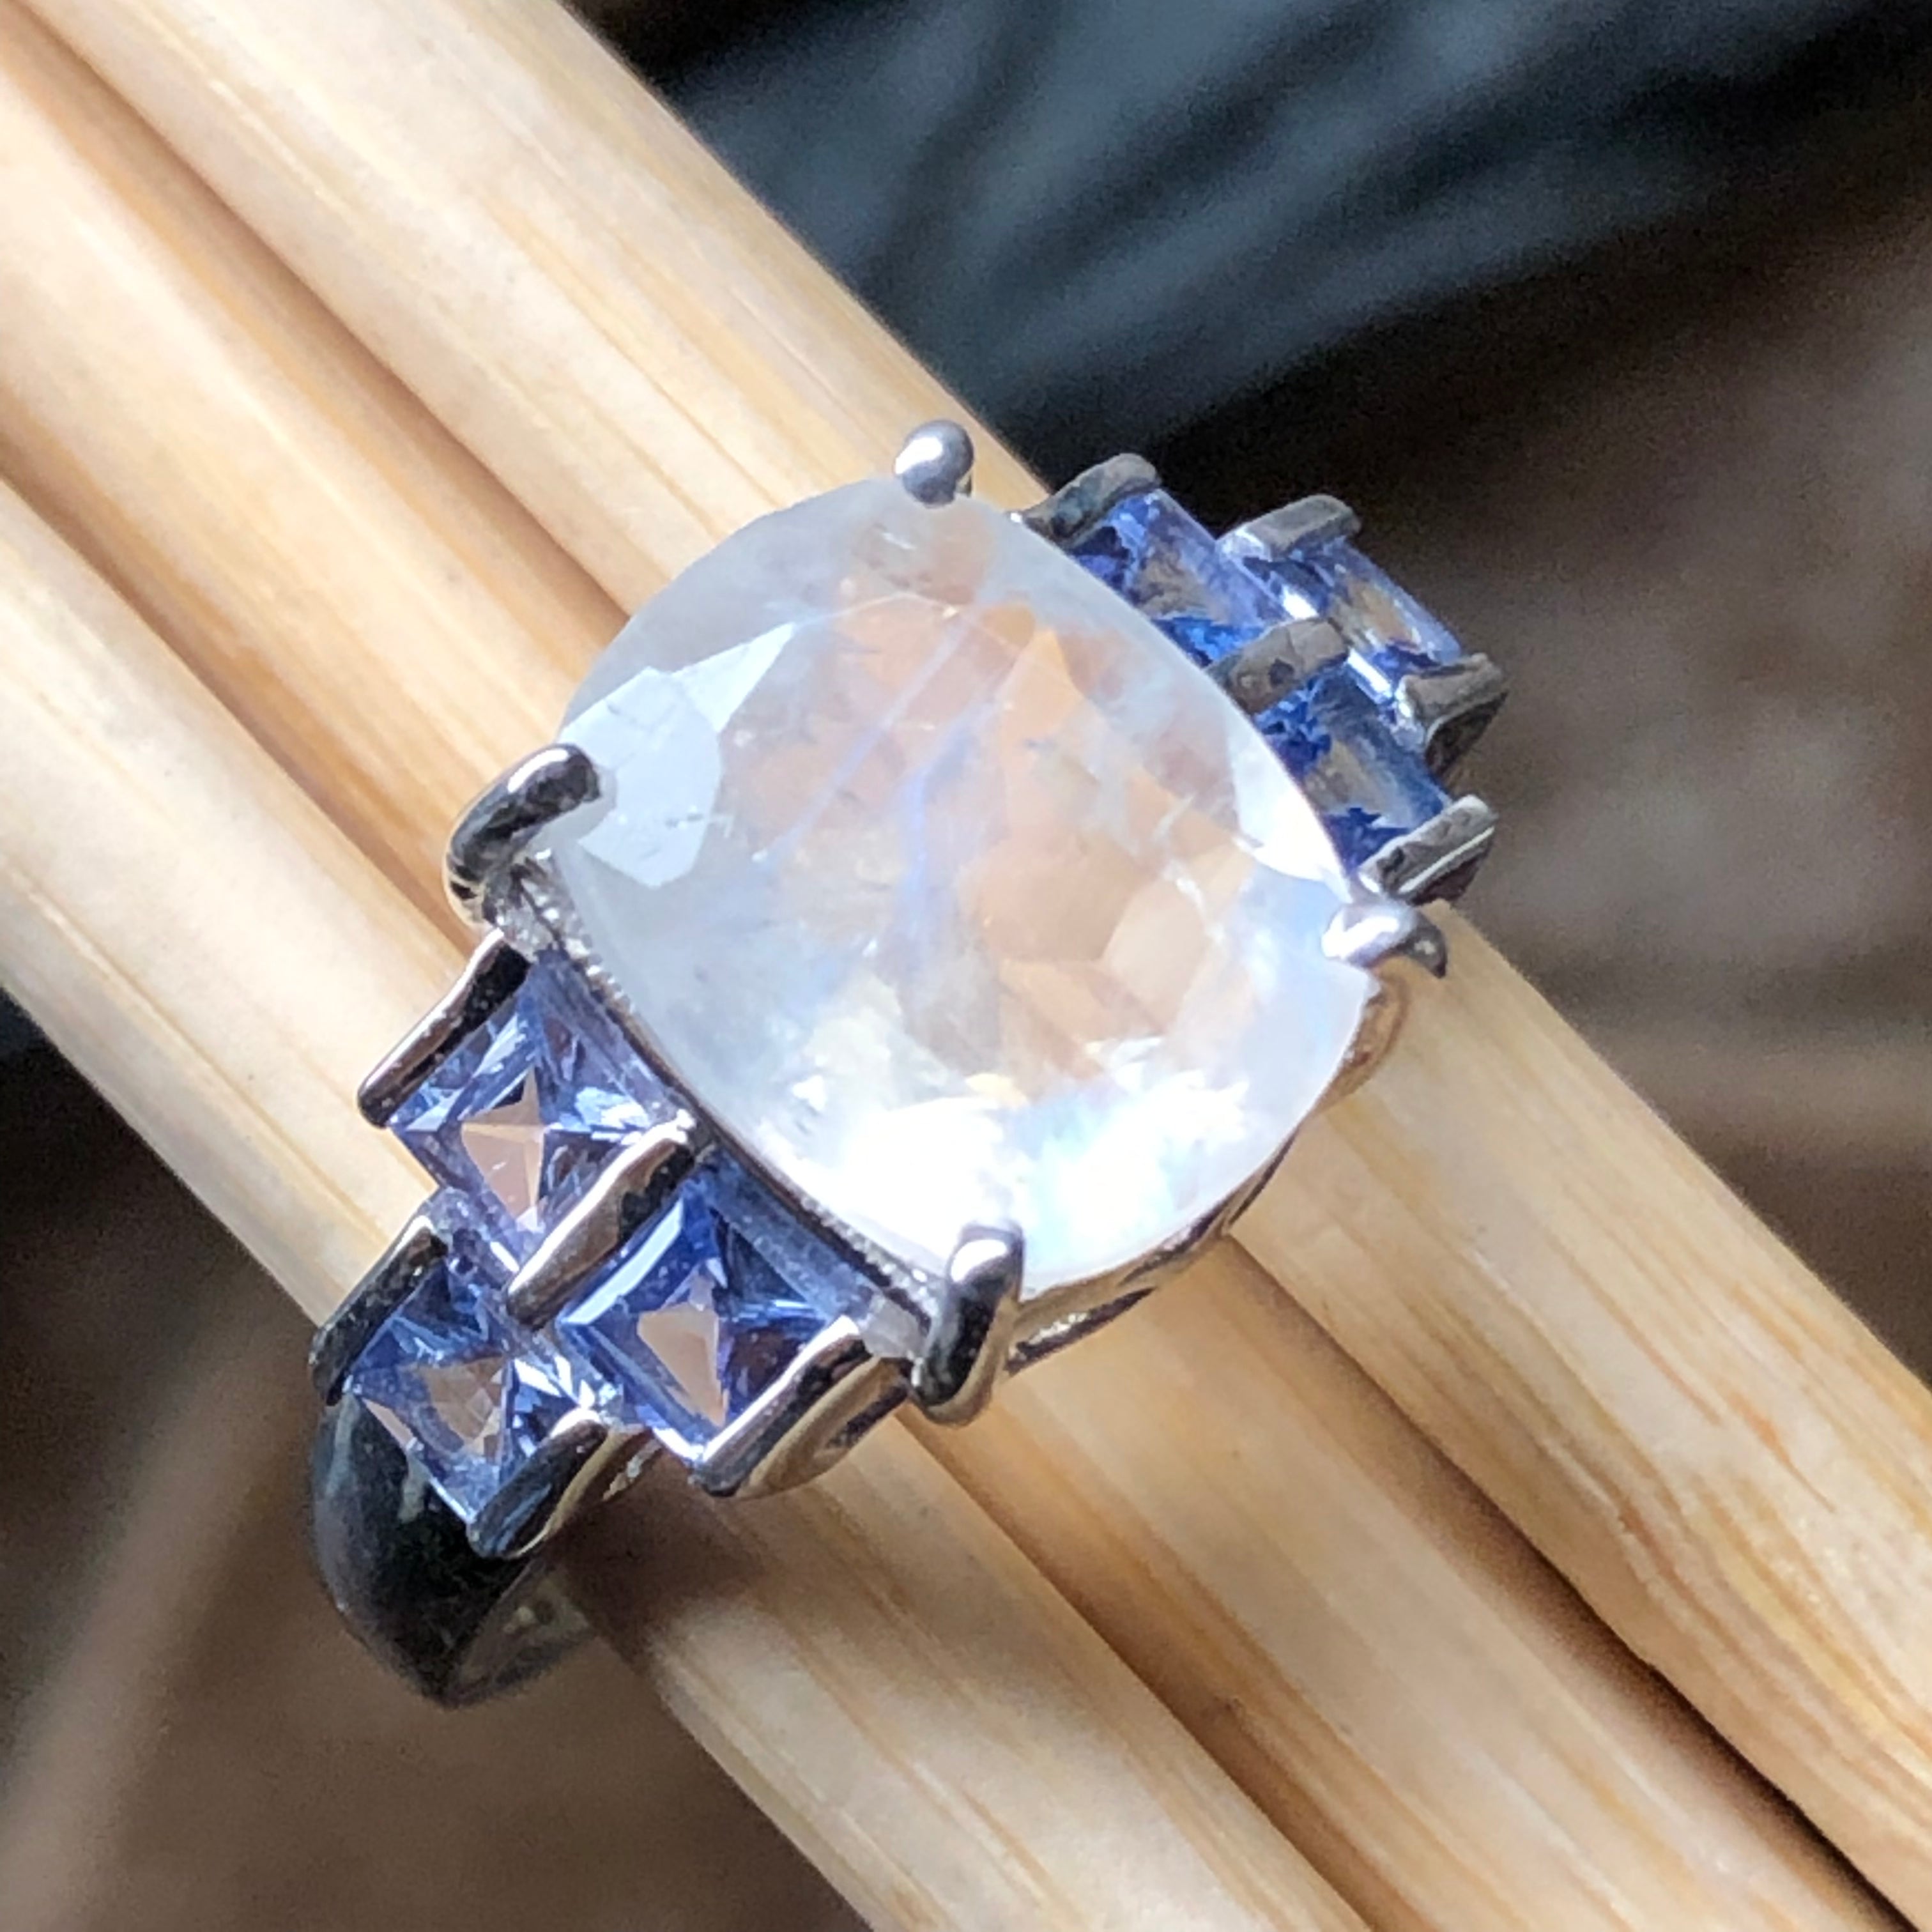 Genuine Rainbow Moonstone, Blue Tanzanite 925 Solid Sterling Silver Ring Size 6, 7, 8, 9 - Natural Rocks by Kala